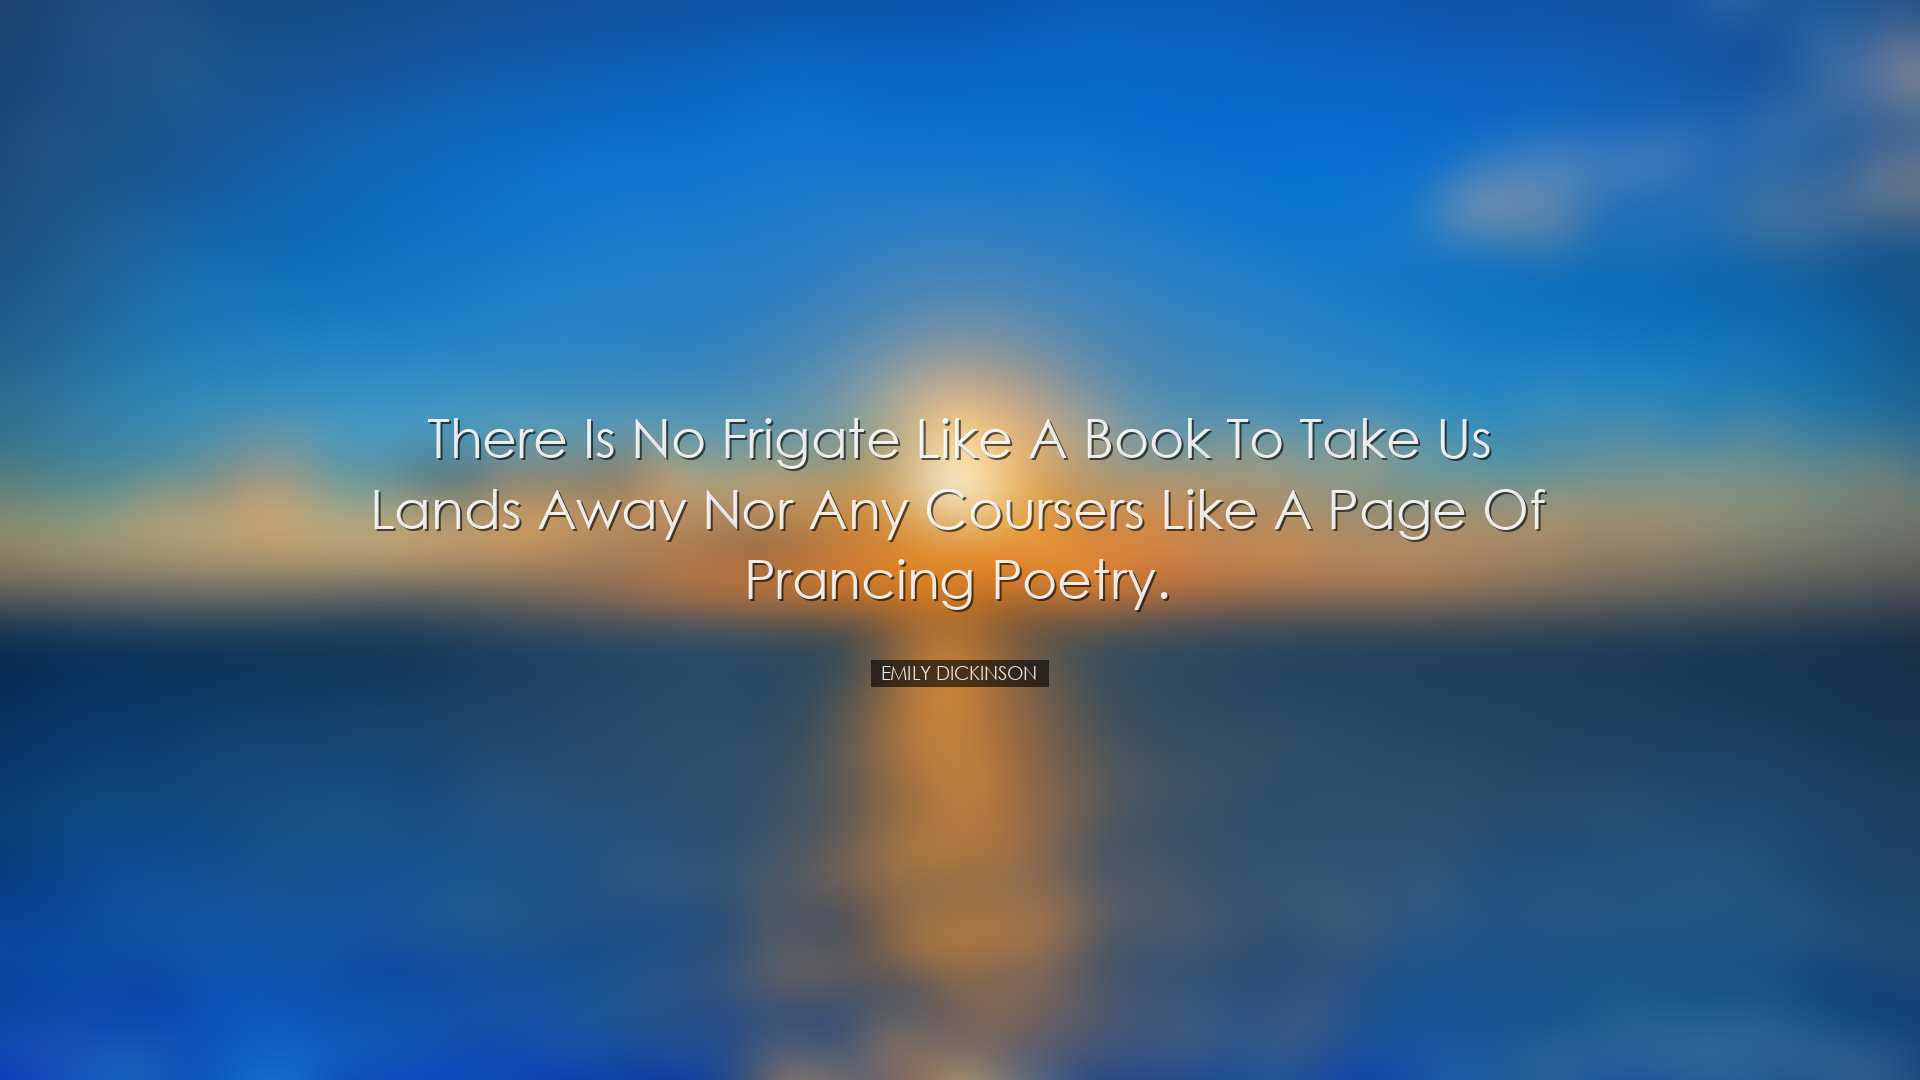 There is no Frigate like a book to take us lands away nor any cour